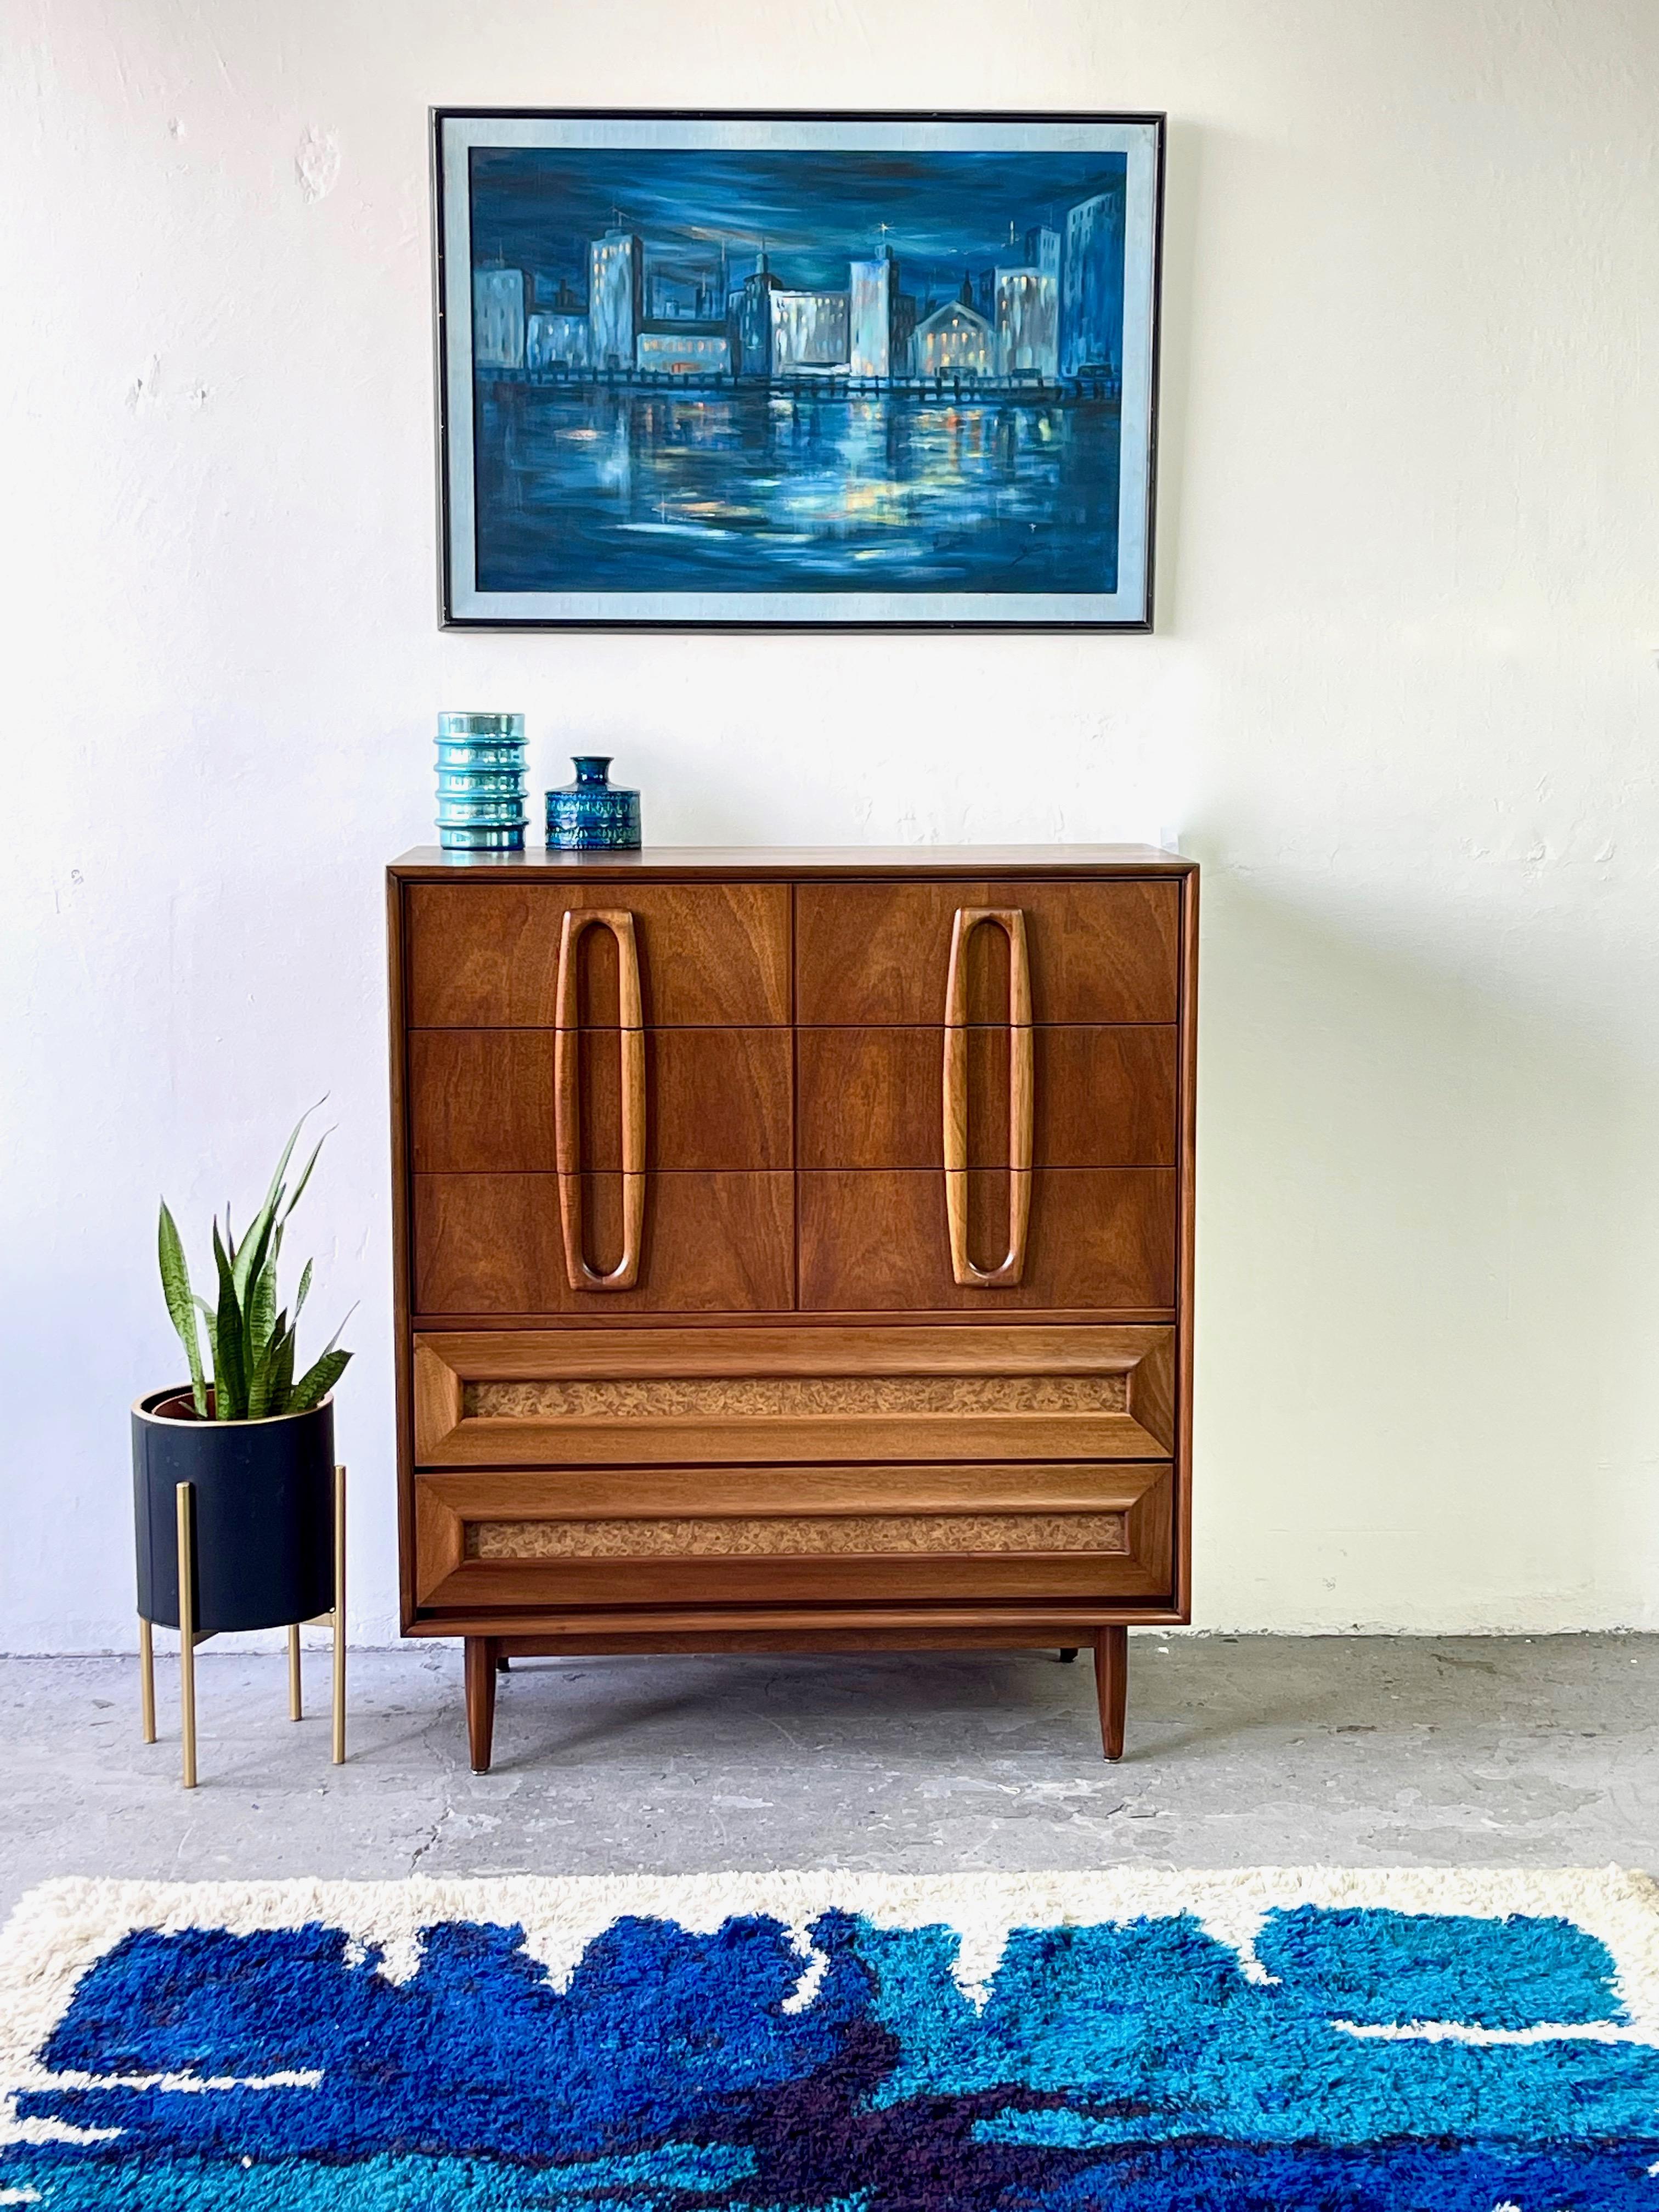 An unbelievably designed mid century modern highboy dresser featuring gorgeous walnut woodgrain alongside burl laminate accent delicately sculpted pulls!

No significant imperfections to note! All drawers function smoothly. 

Measures: 40.25